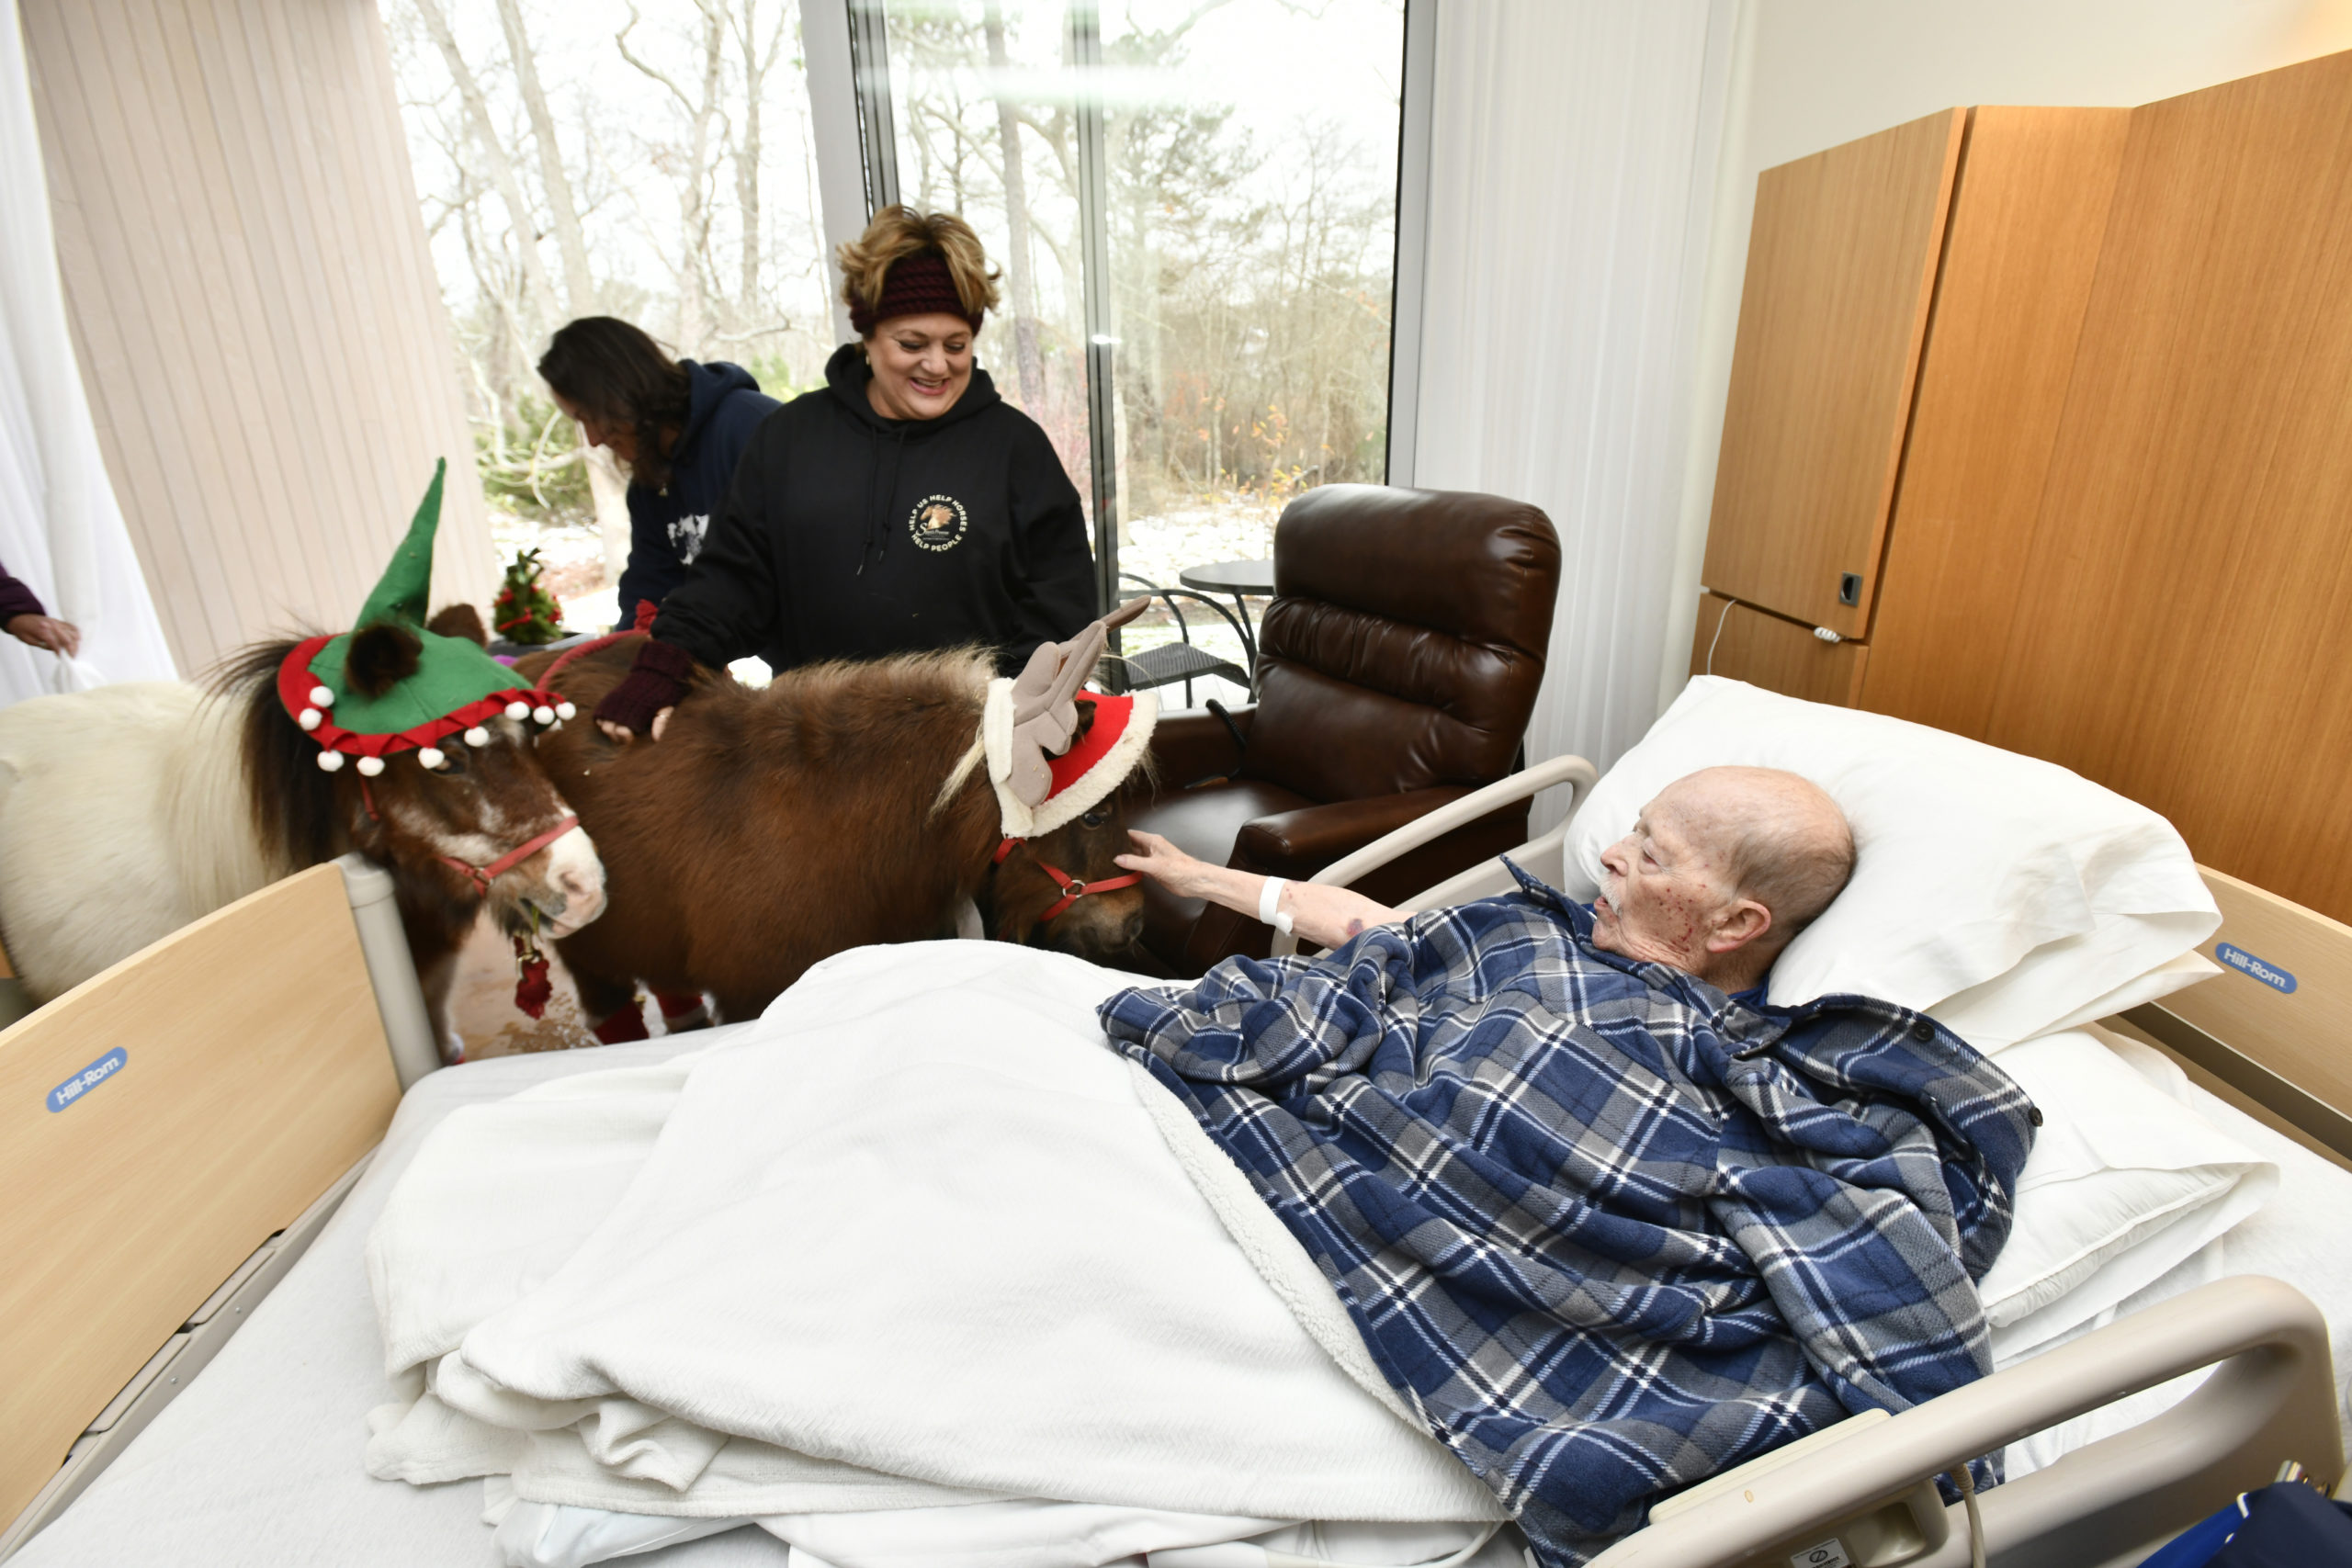 Daniel Byrne gets a visit from mini horses Sweetie and Christmas at the East End Hospice Kanas Center for Hospice Care on Wednesday, December 4.   DANA SHAW